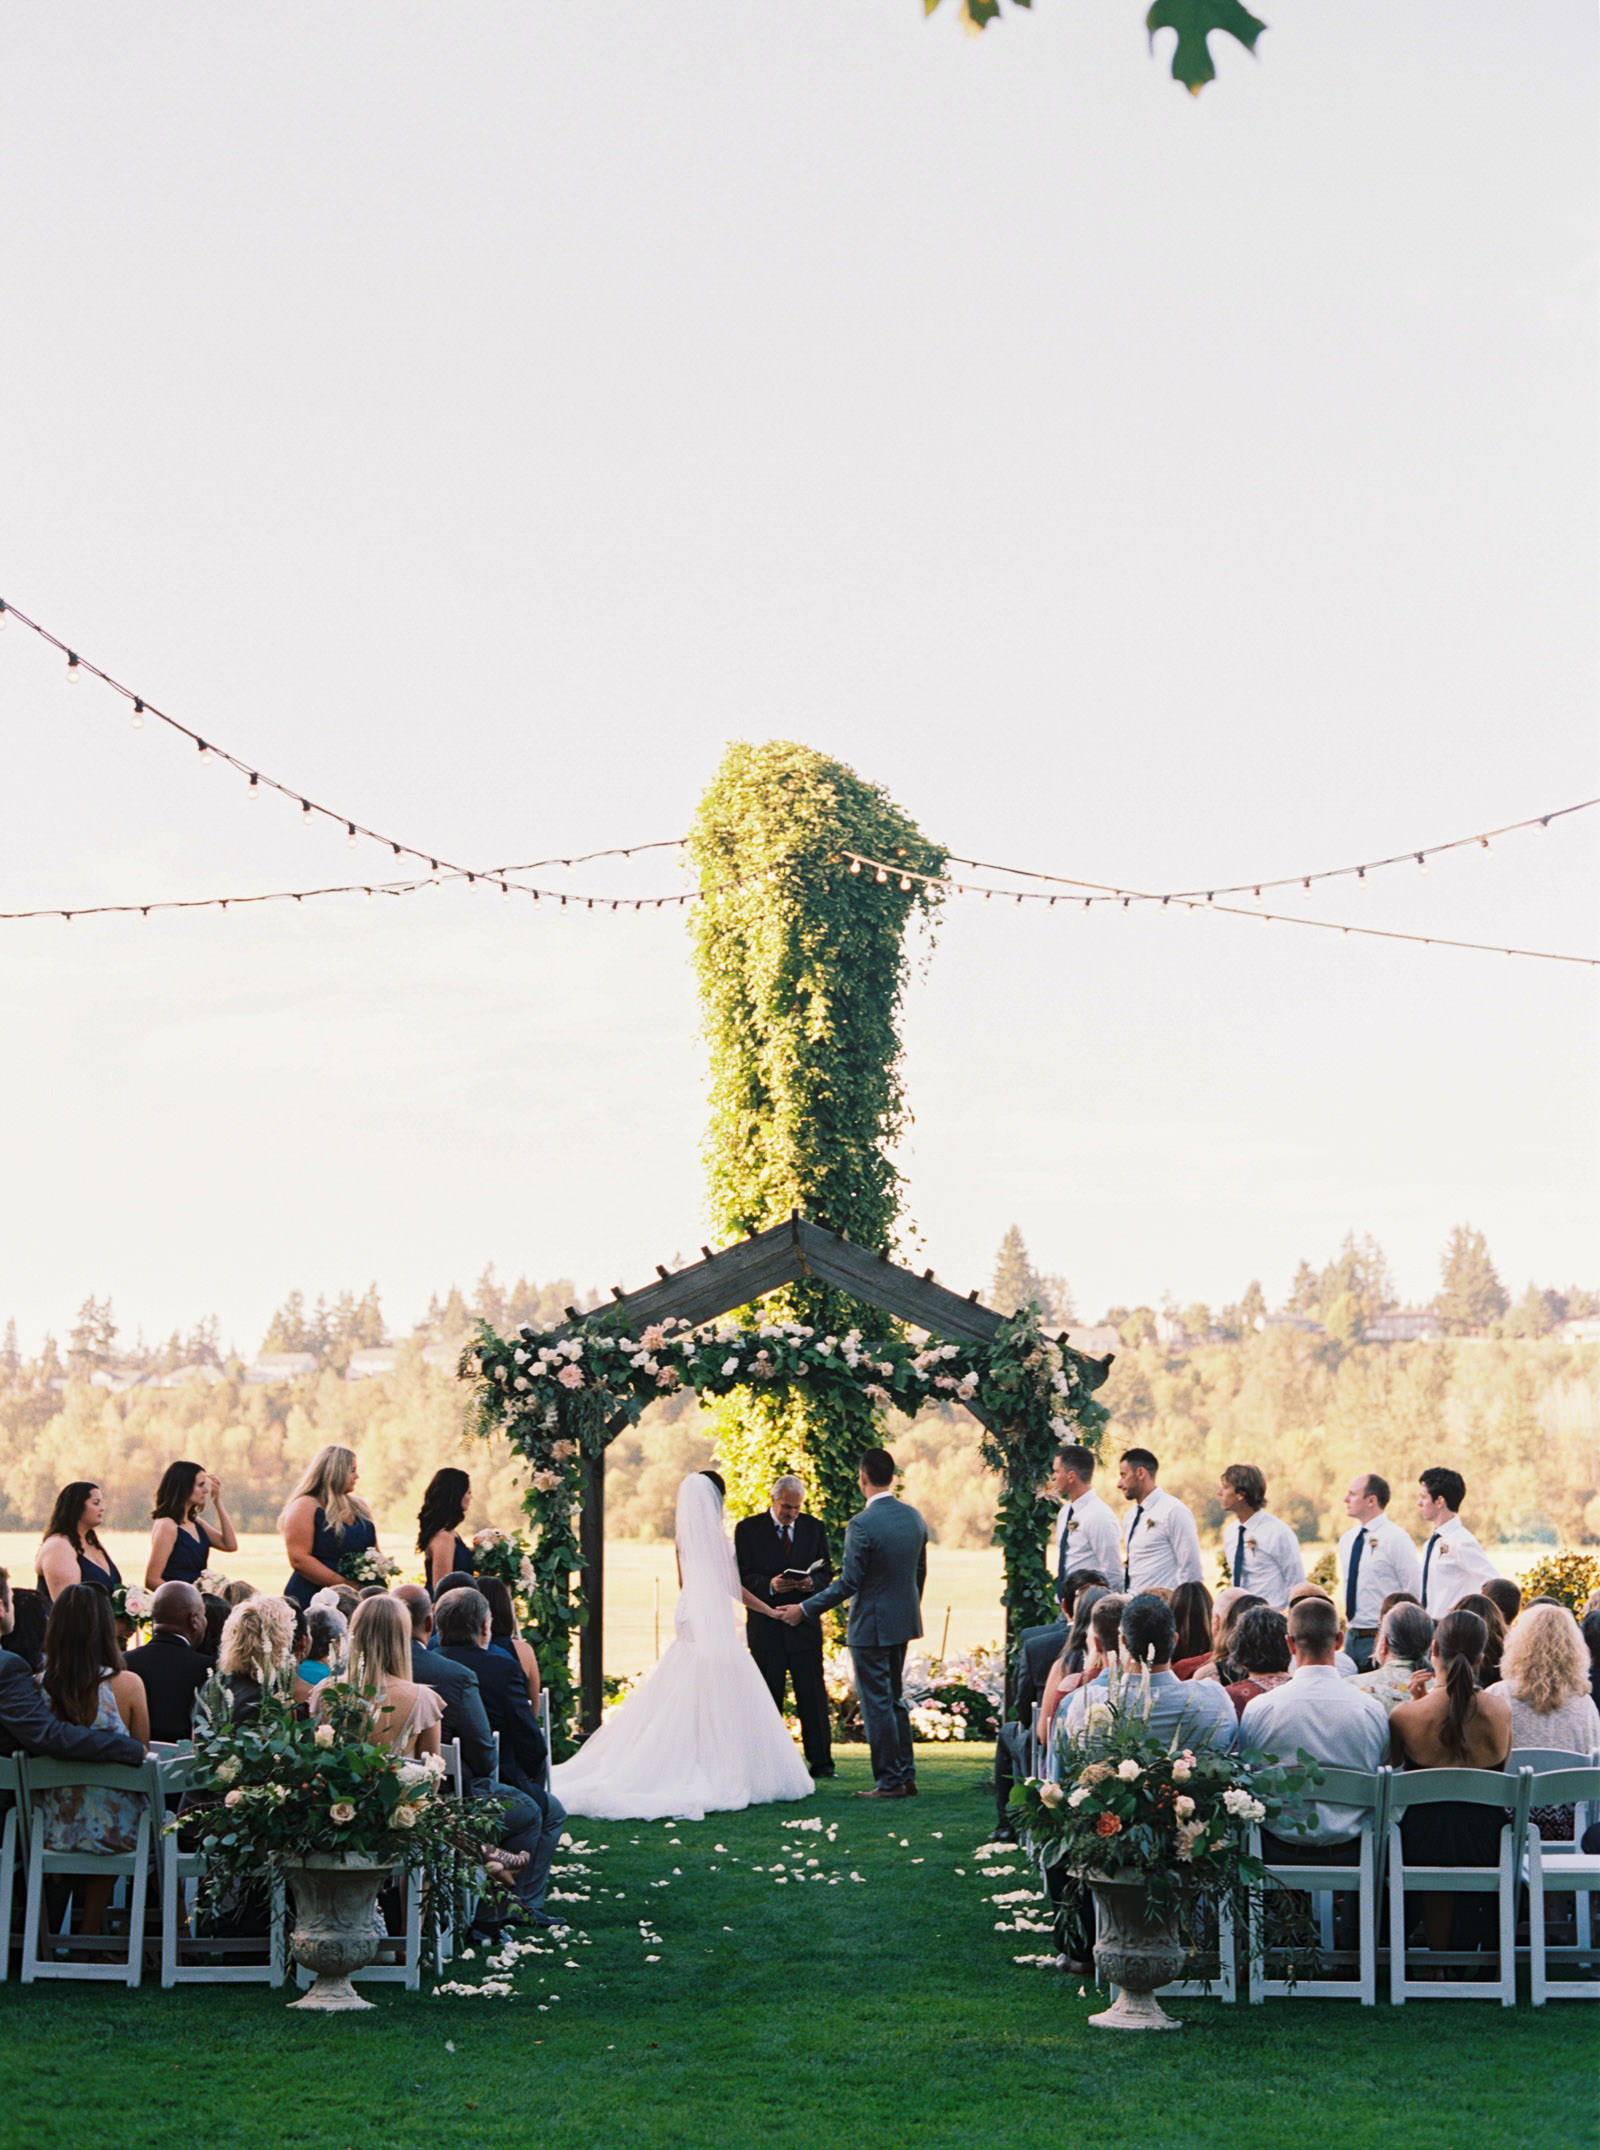 Fall Wedding Ceremony at Kelley Farms | Seattle Wedding Photographer Anna Peters